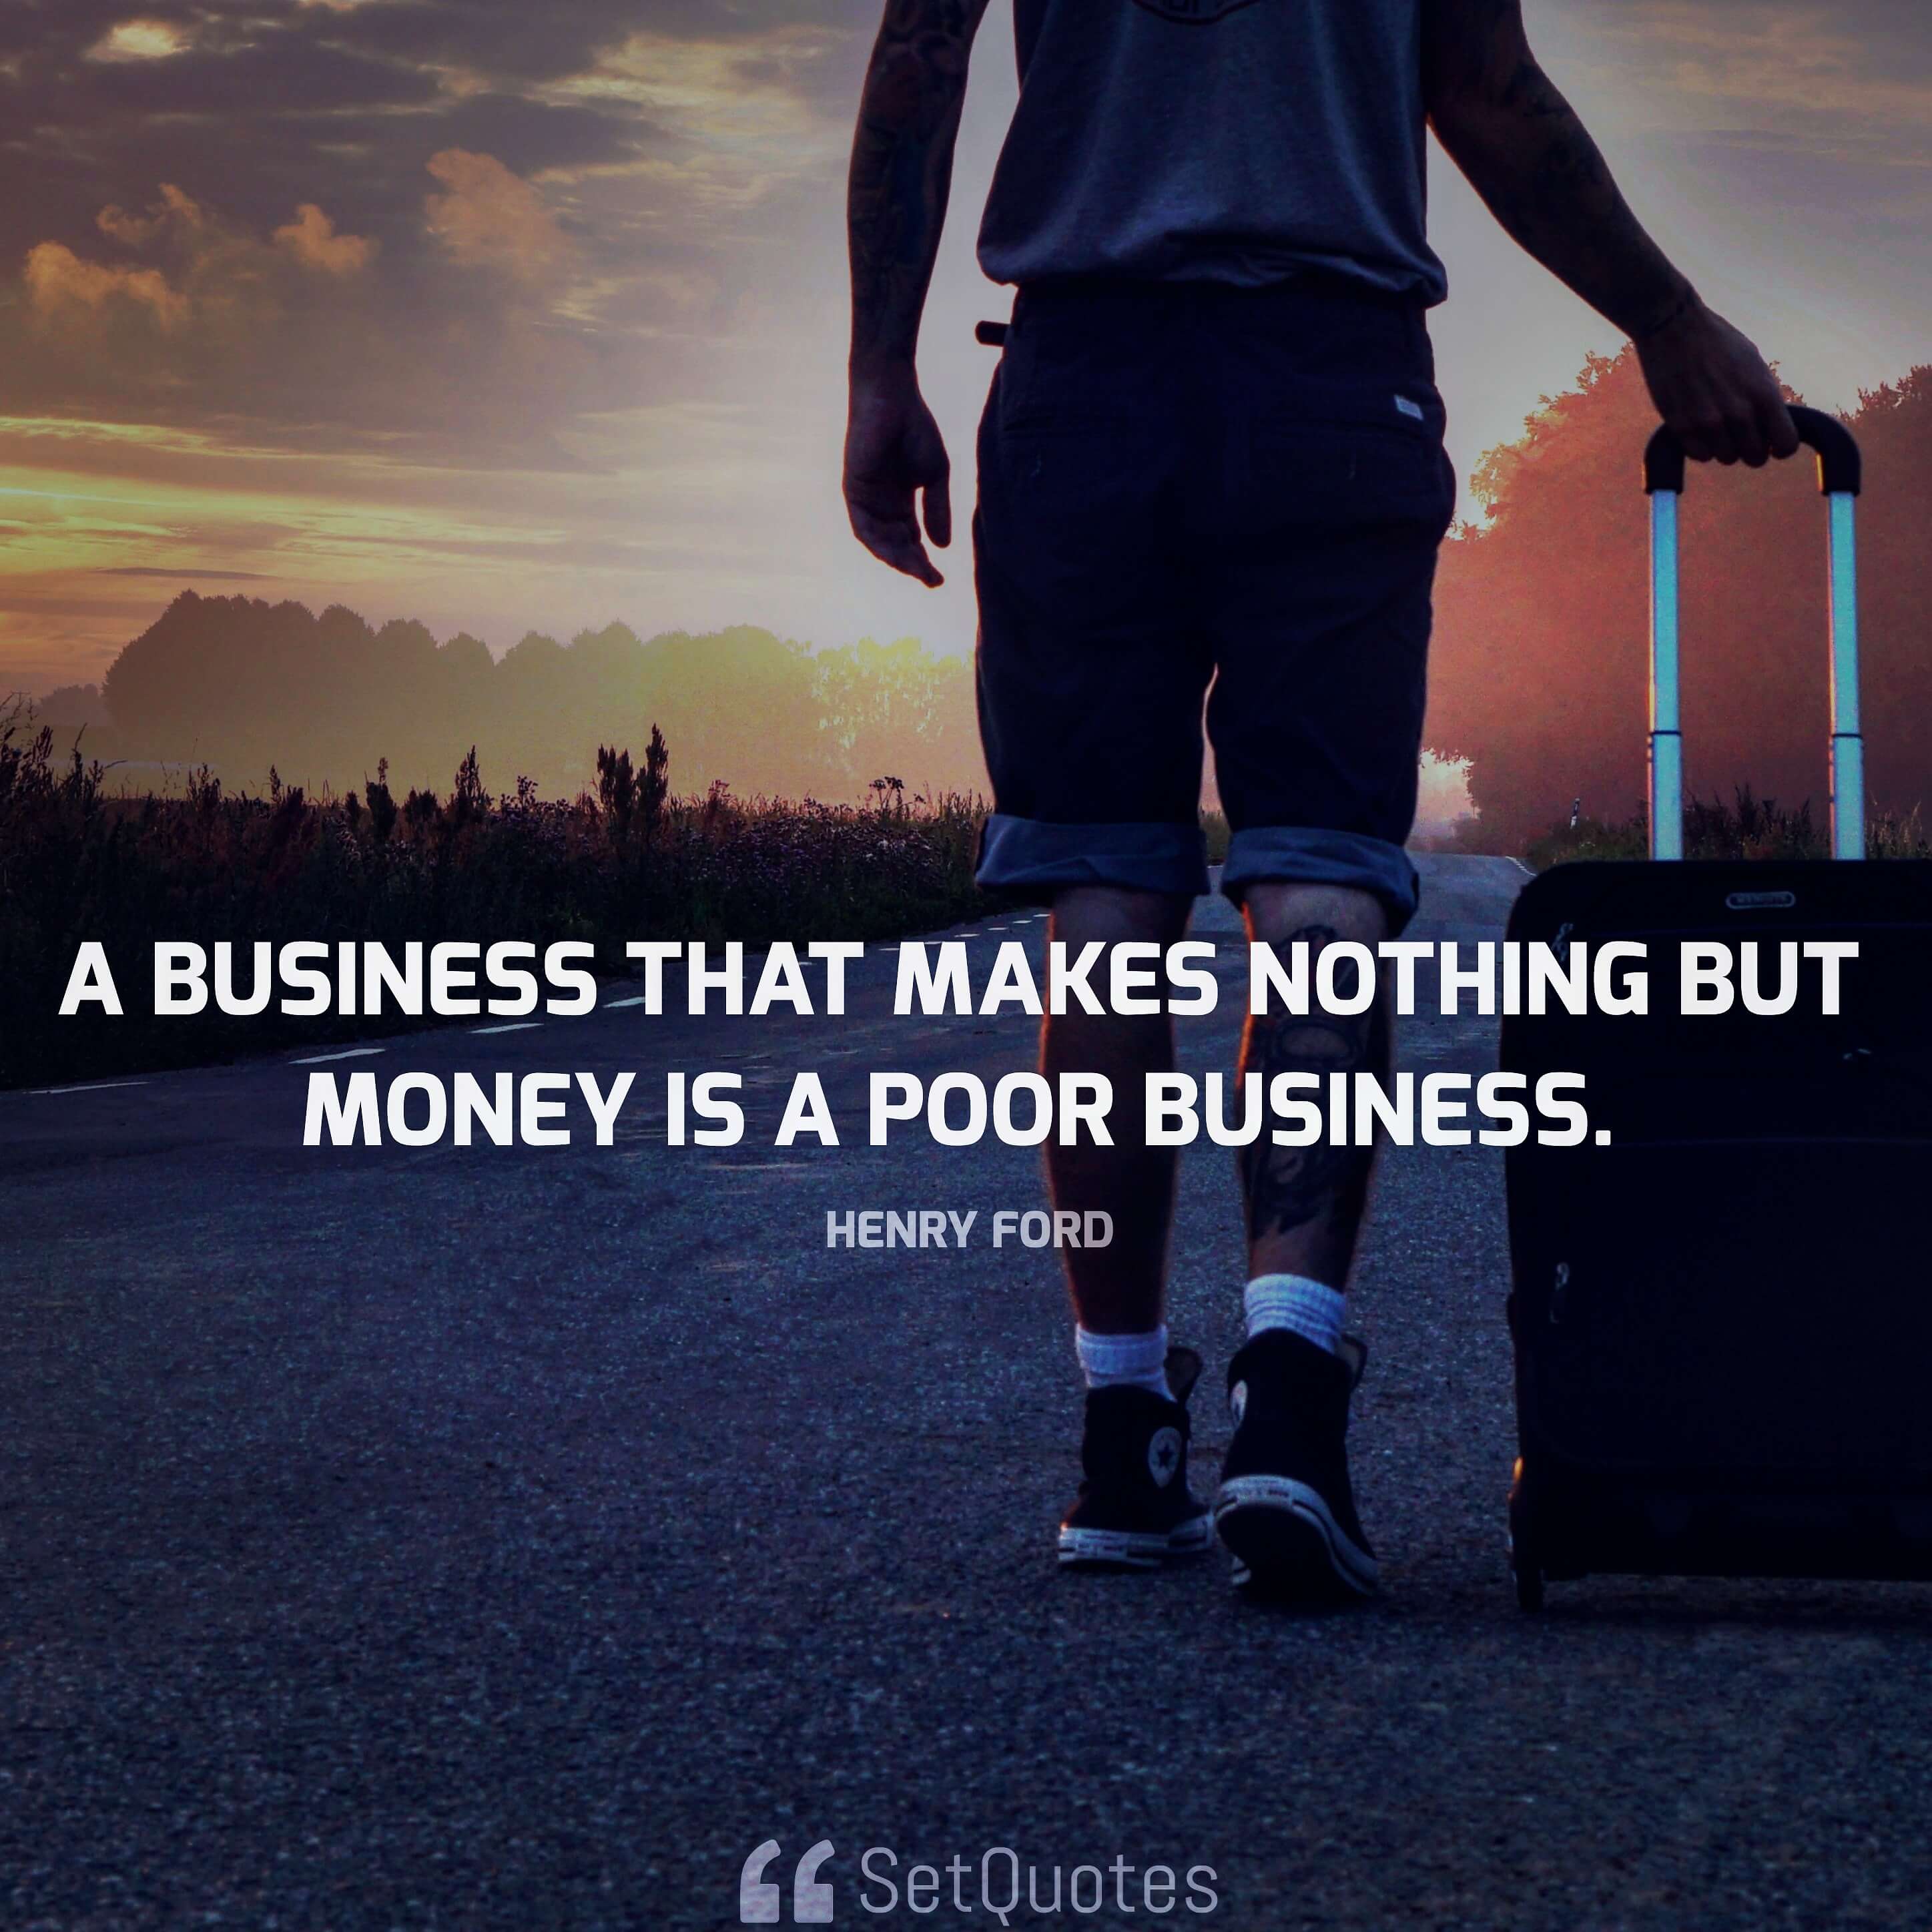 A business that makes nothing but money is a poor business. - Henry Ford